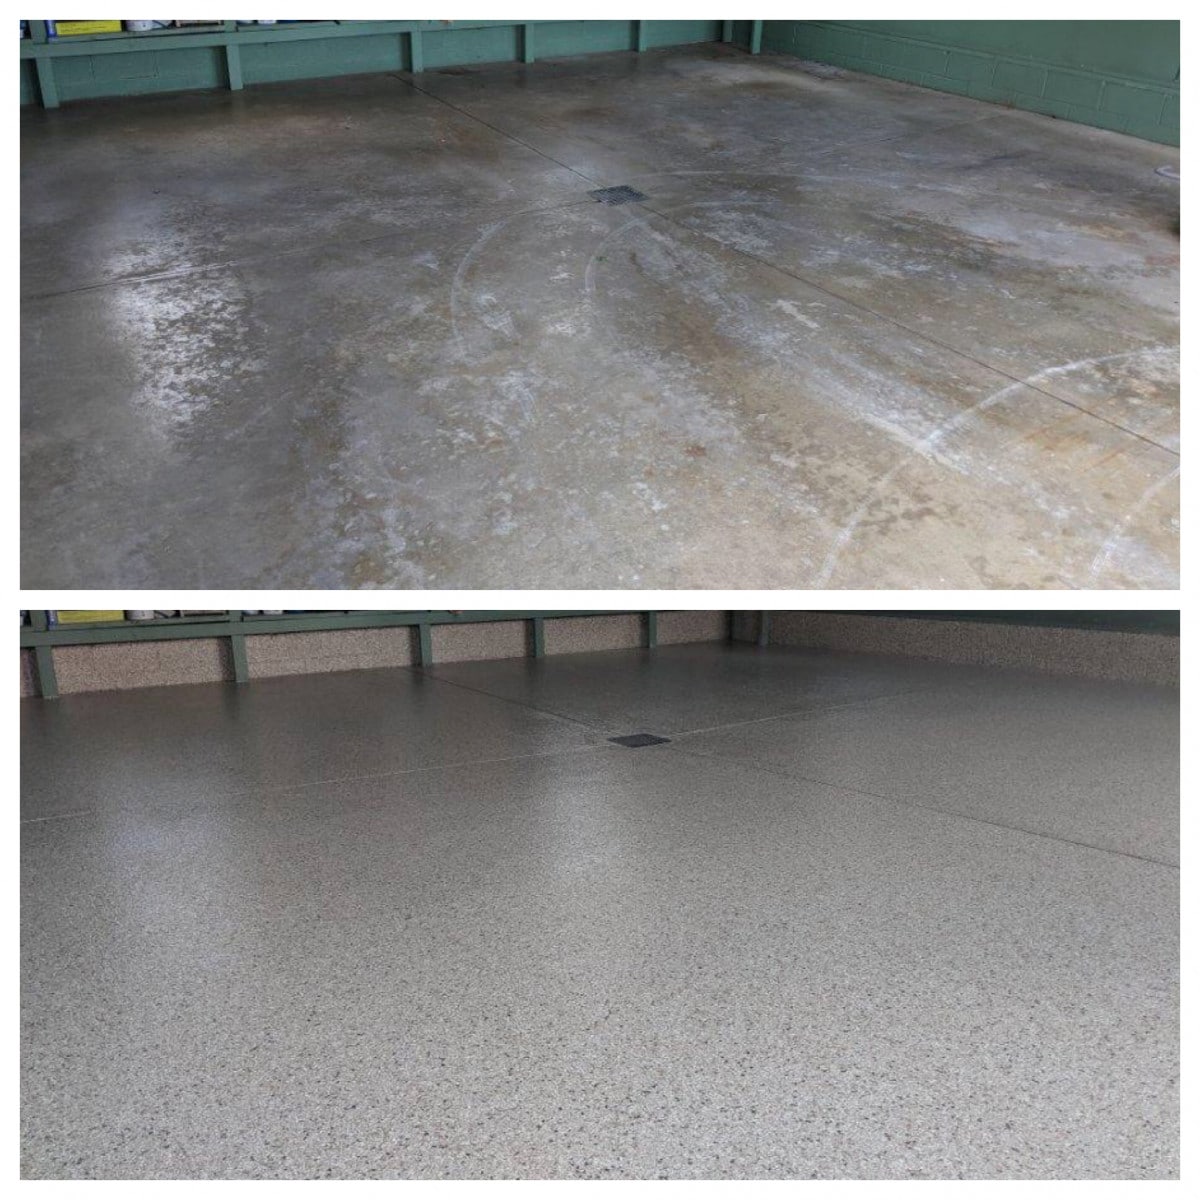 refinished-garage-with-a-custom-concrete-floor-coating